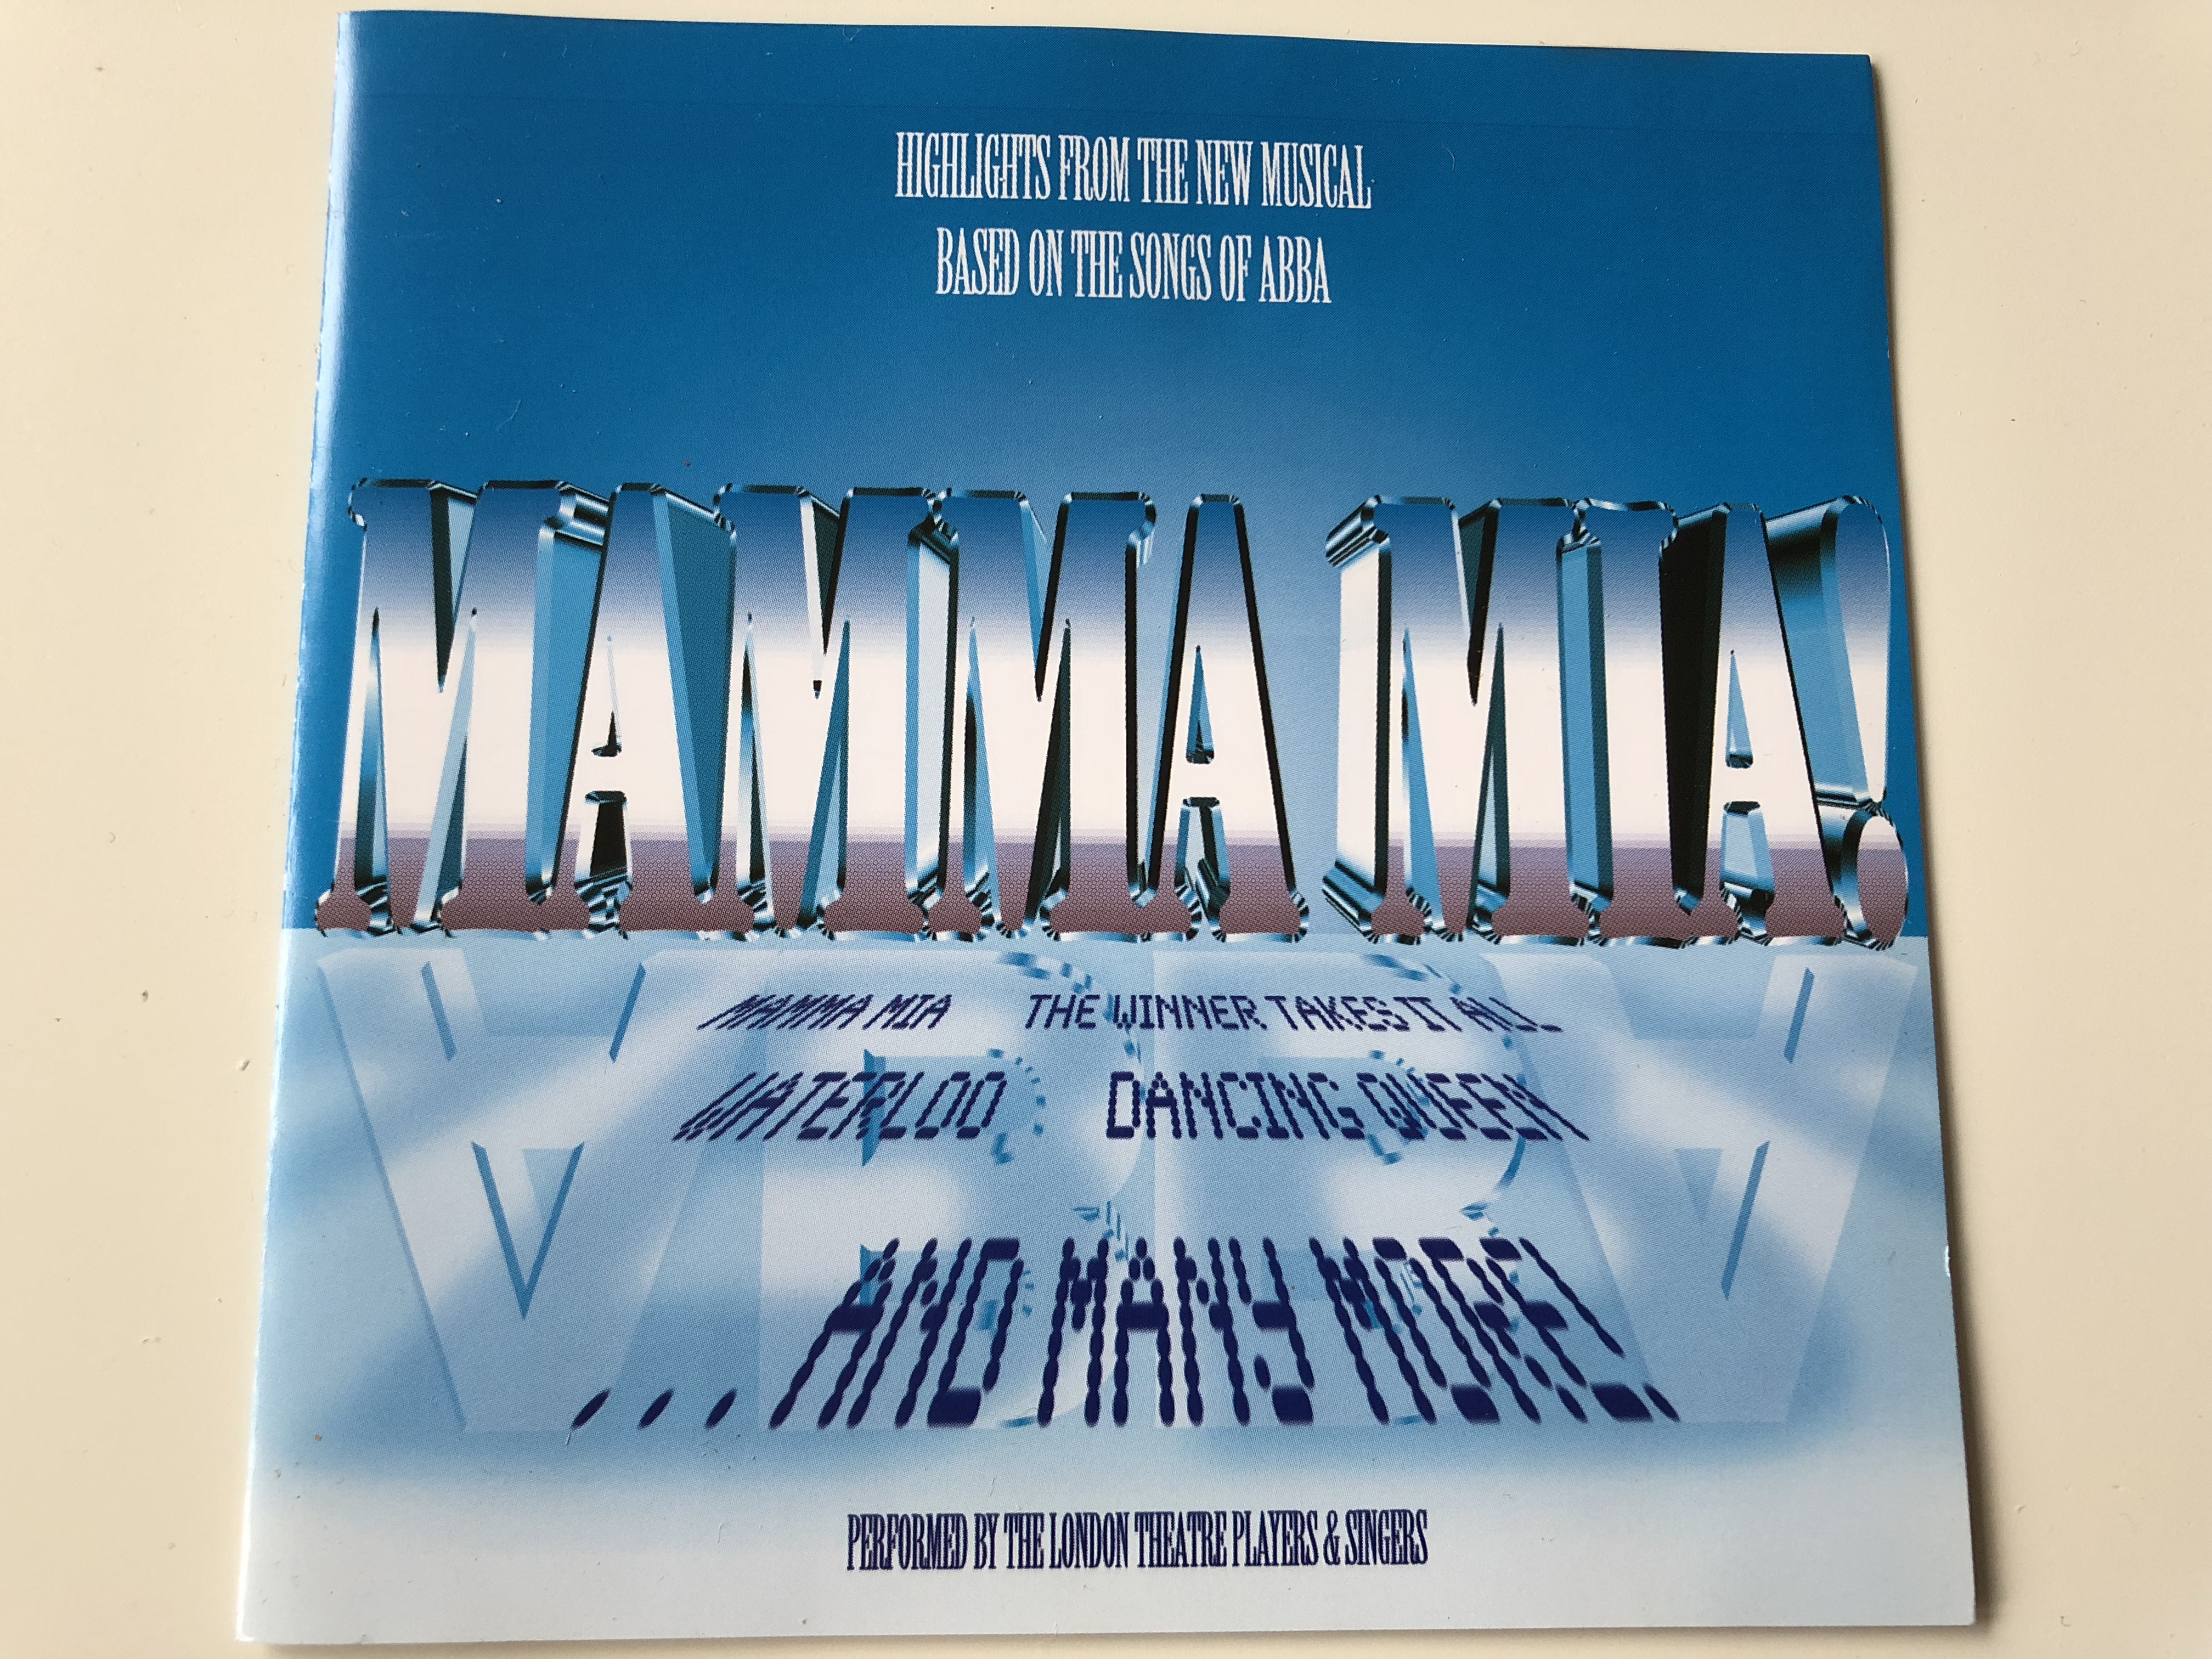 mamma-mia-highlights-from-the-new-musical-based-on-the-songs-of-abba-performed-by-the-london-theatre-players-singers-audio-cd-1999-a-play-1-.jpg